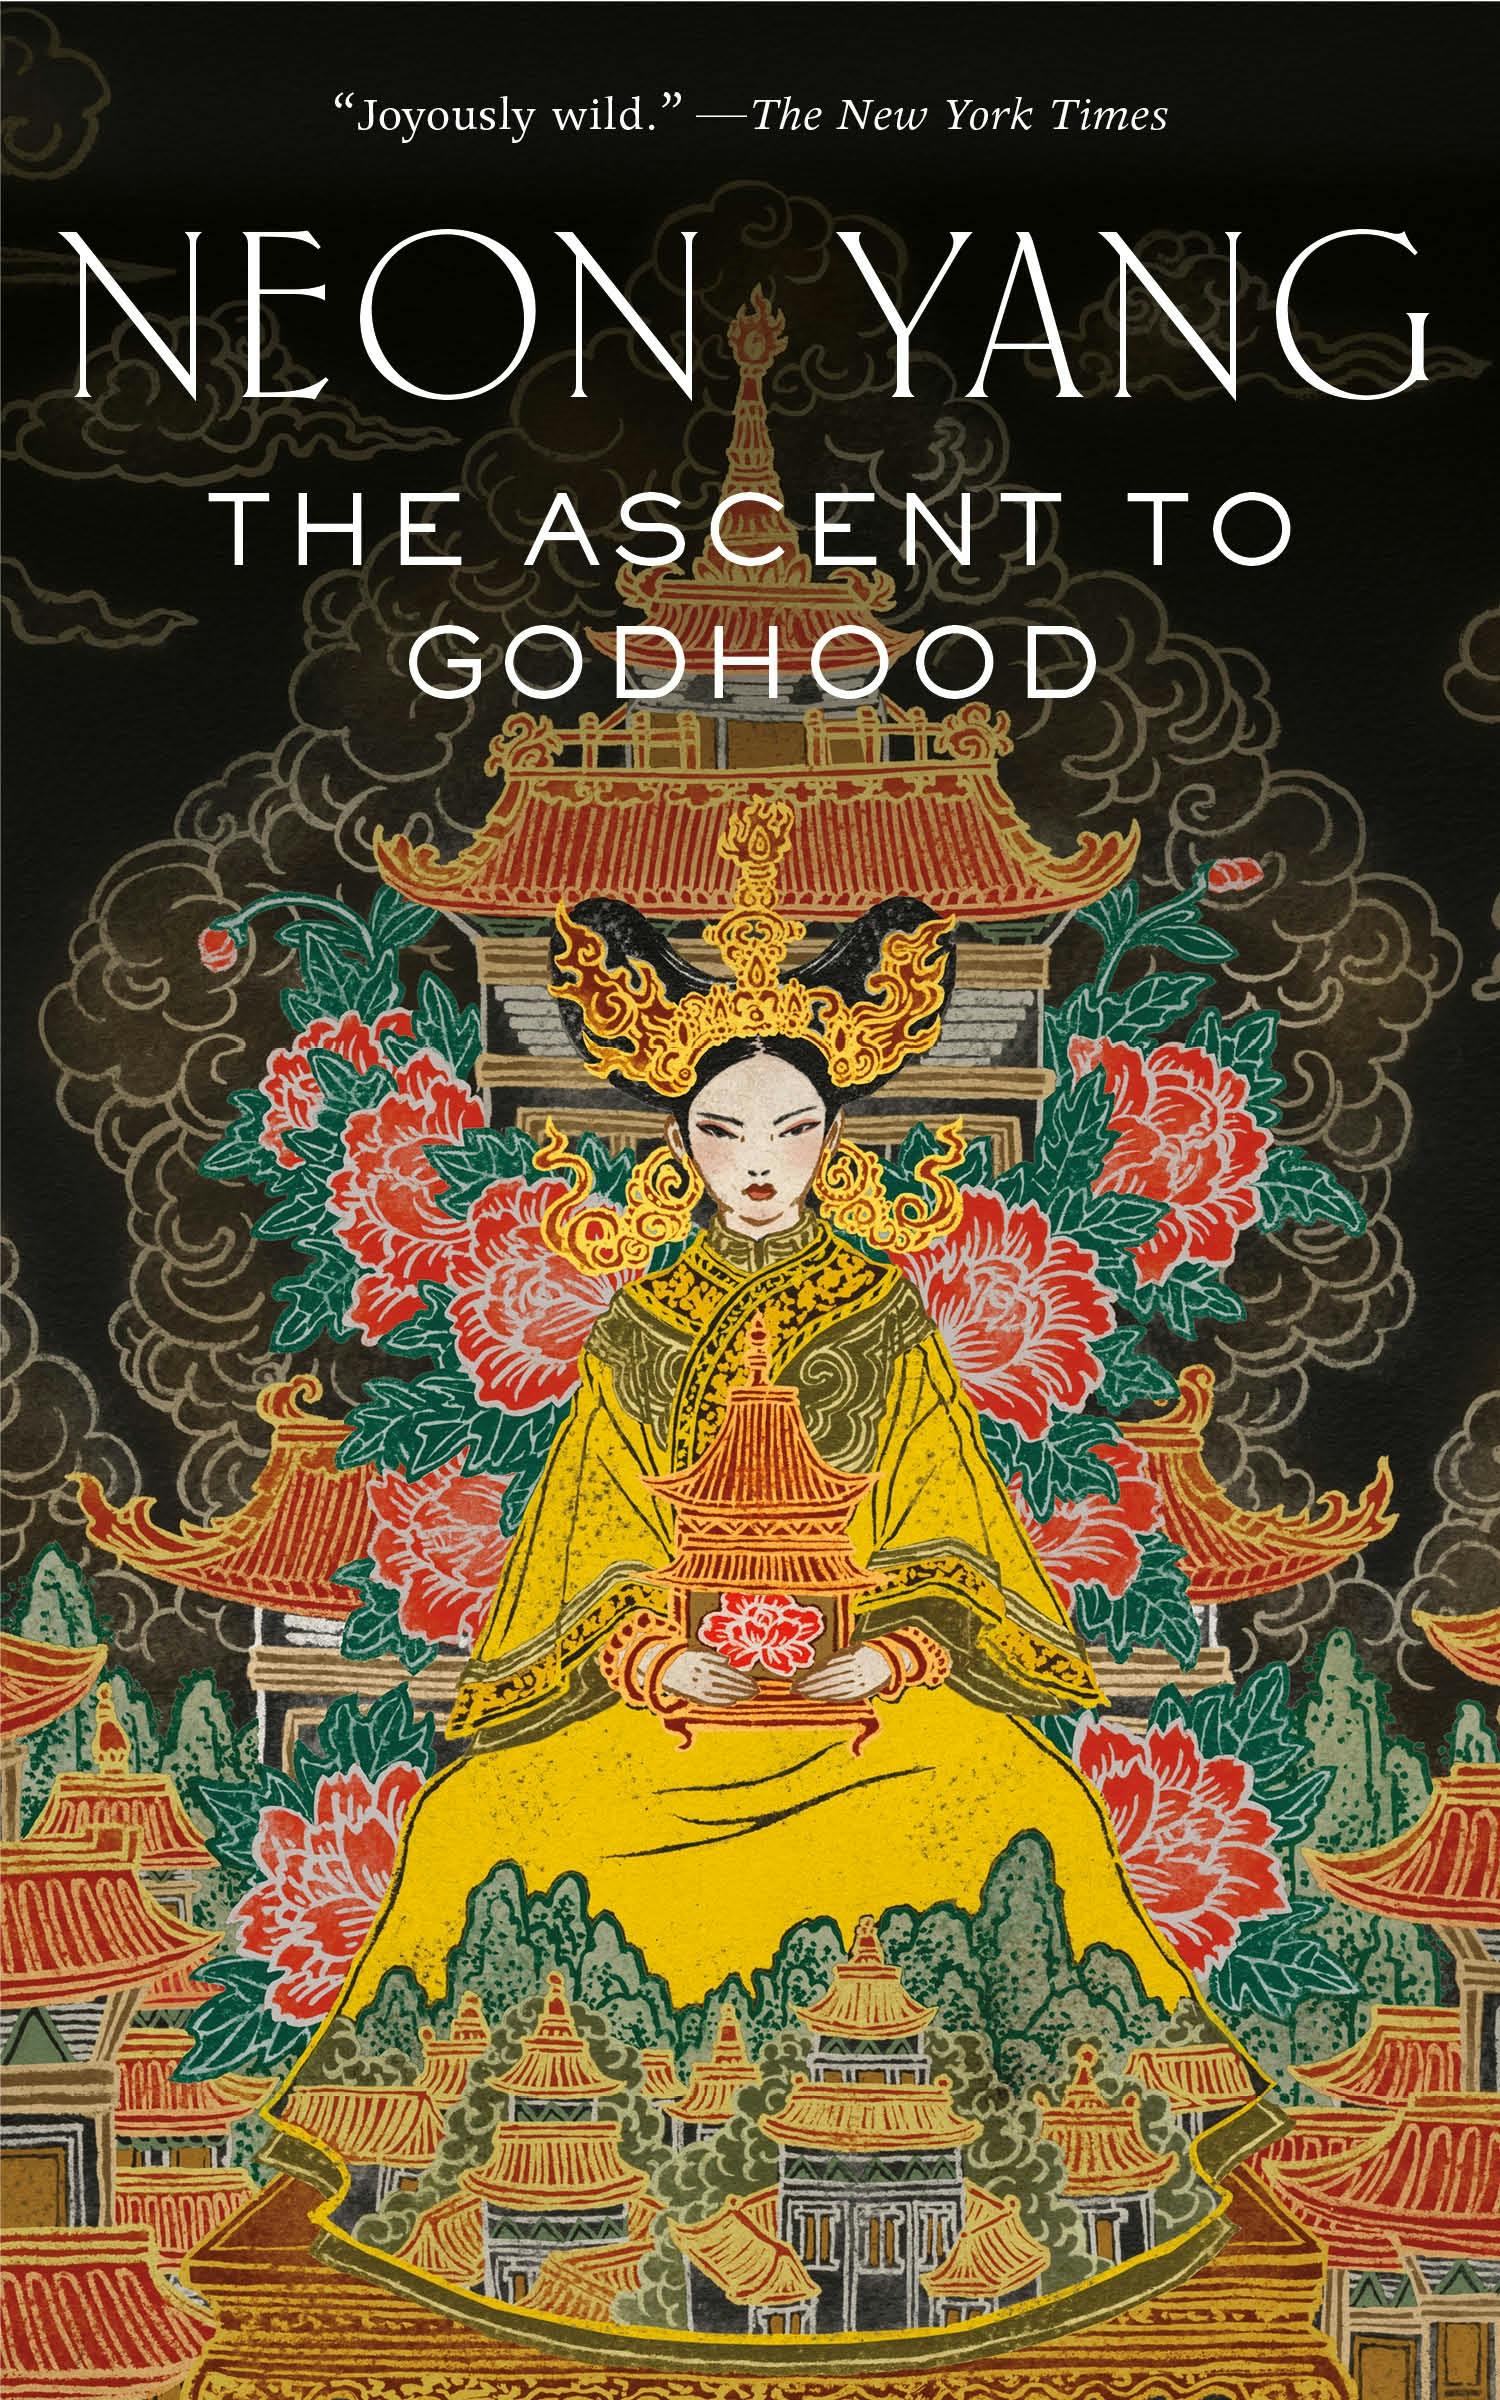 Cover for the book titled as: The Ascent to Godhood